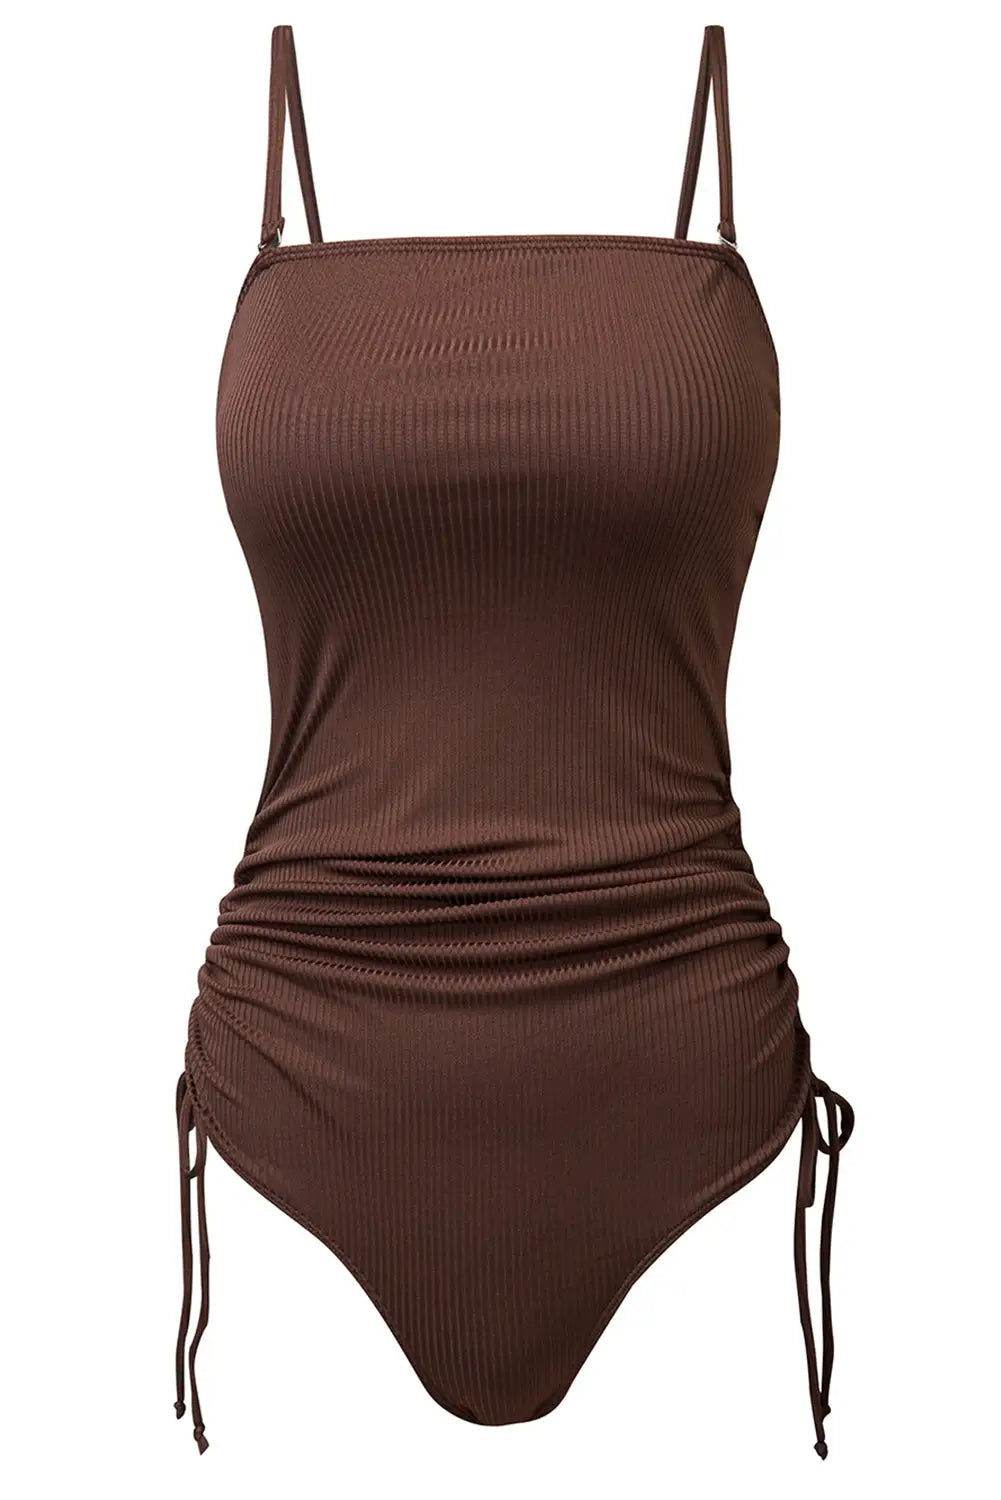 Ribbed drawstring sides one piece swimsuit - swimsuits